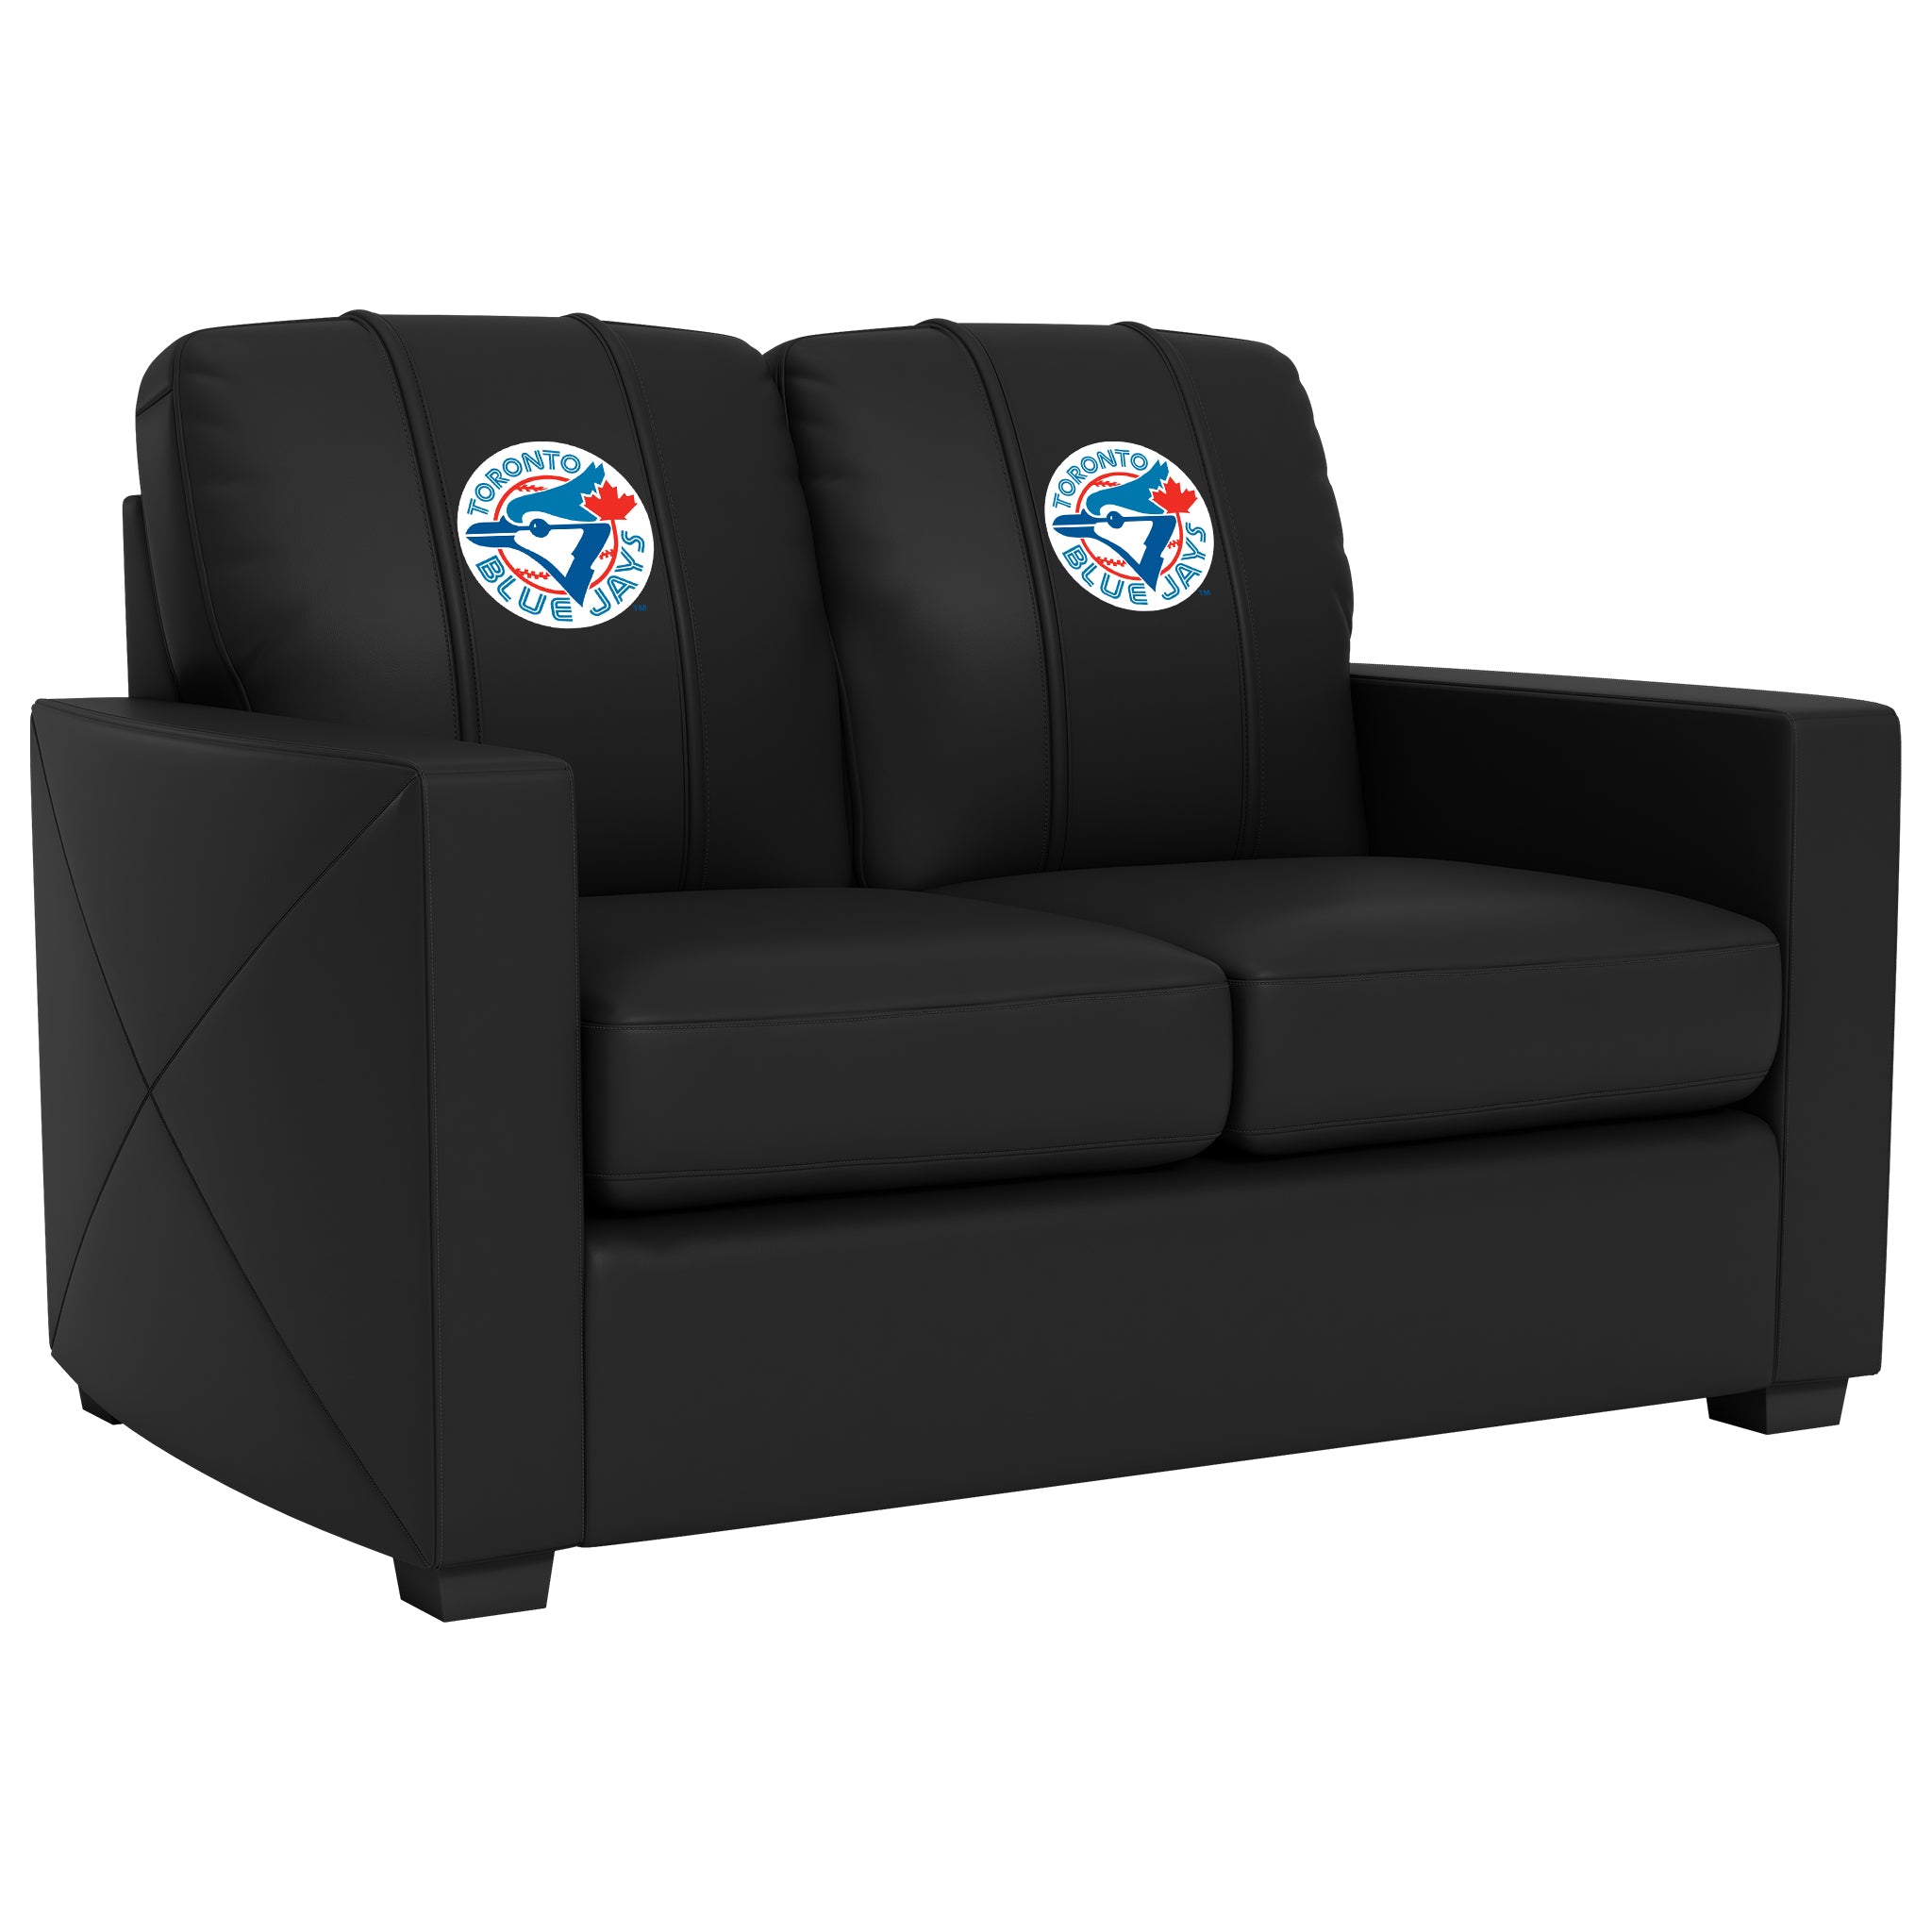 Silver Loveseat with Toronto Blue Jays Cooperstown